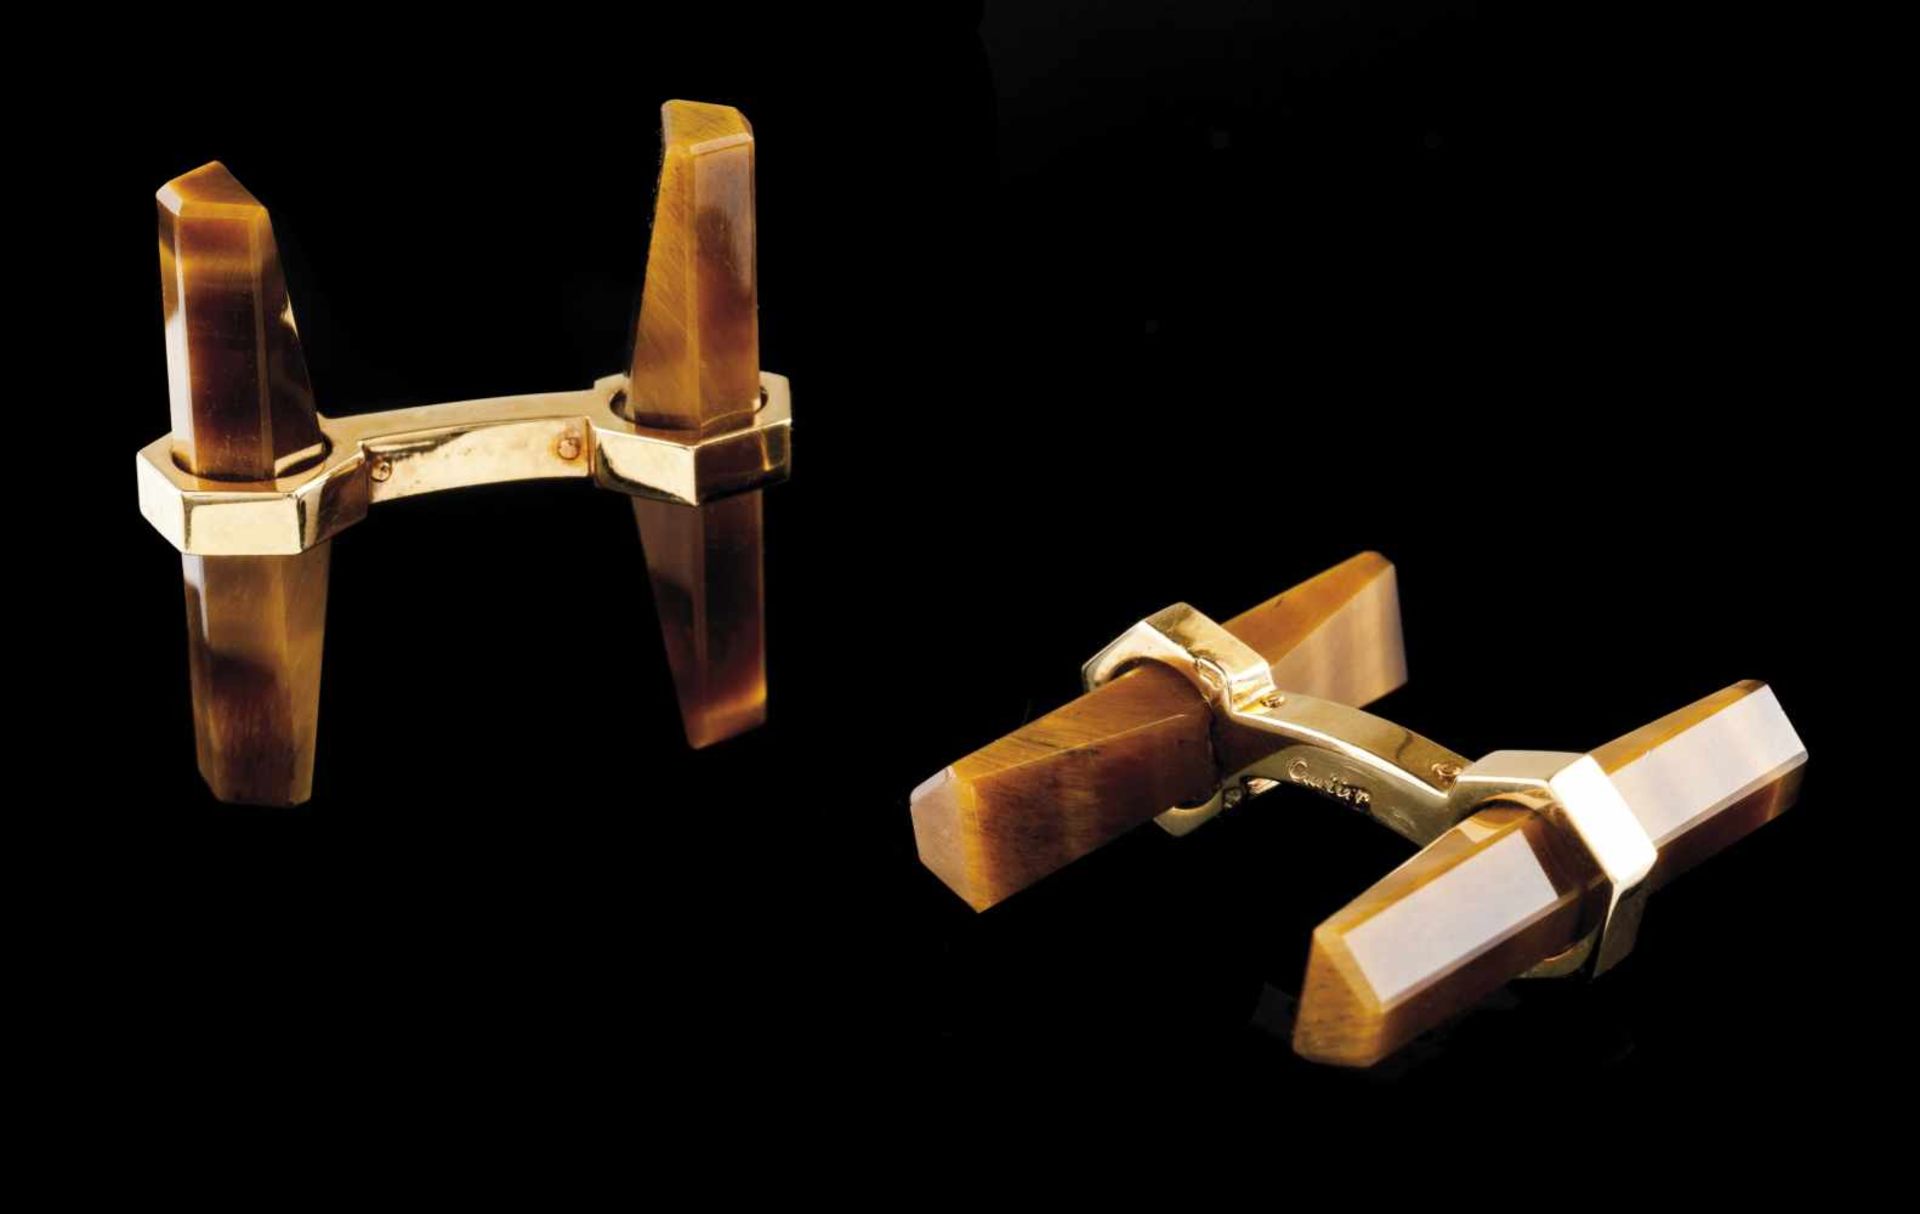 A pair of Cartier cufflinksGoldFaceted tiger's eye cross bars French assay marks 750/10